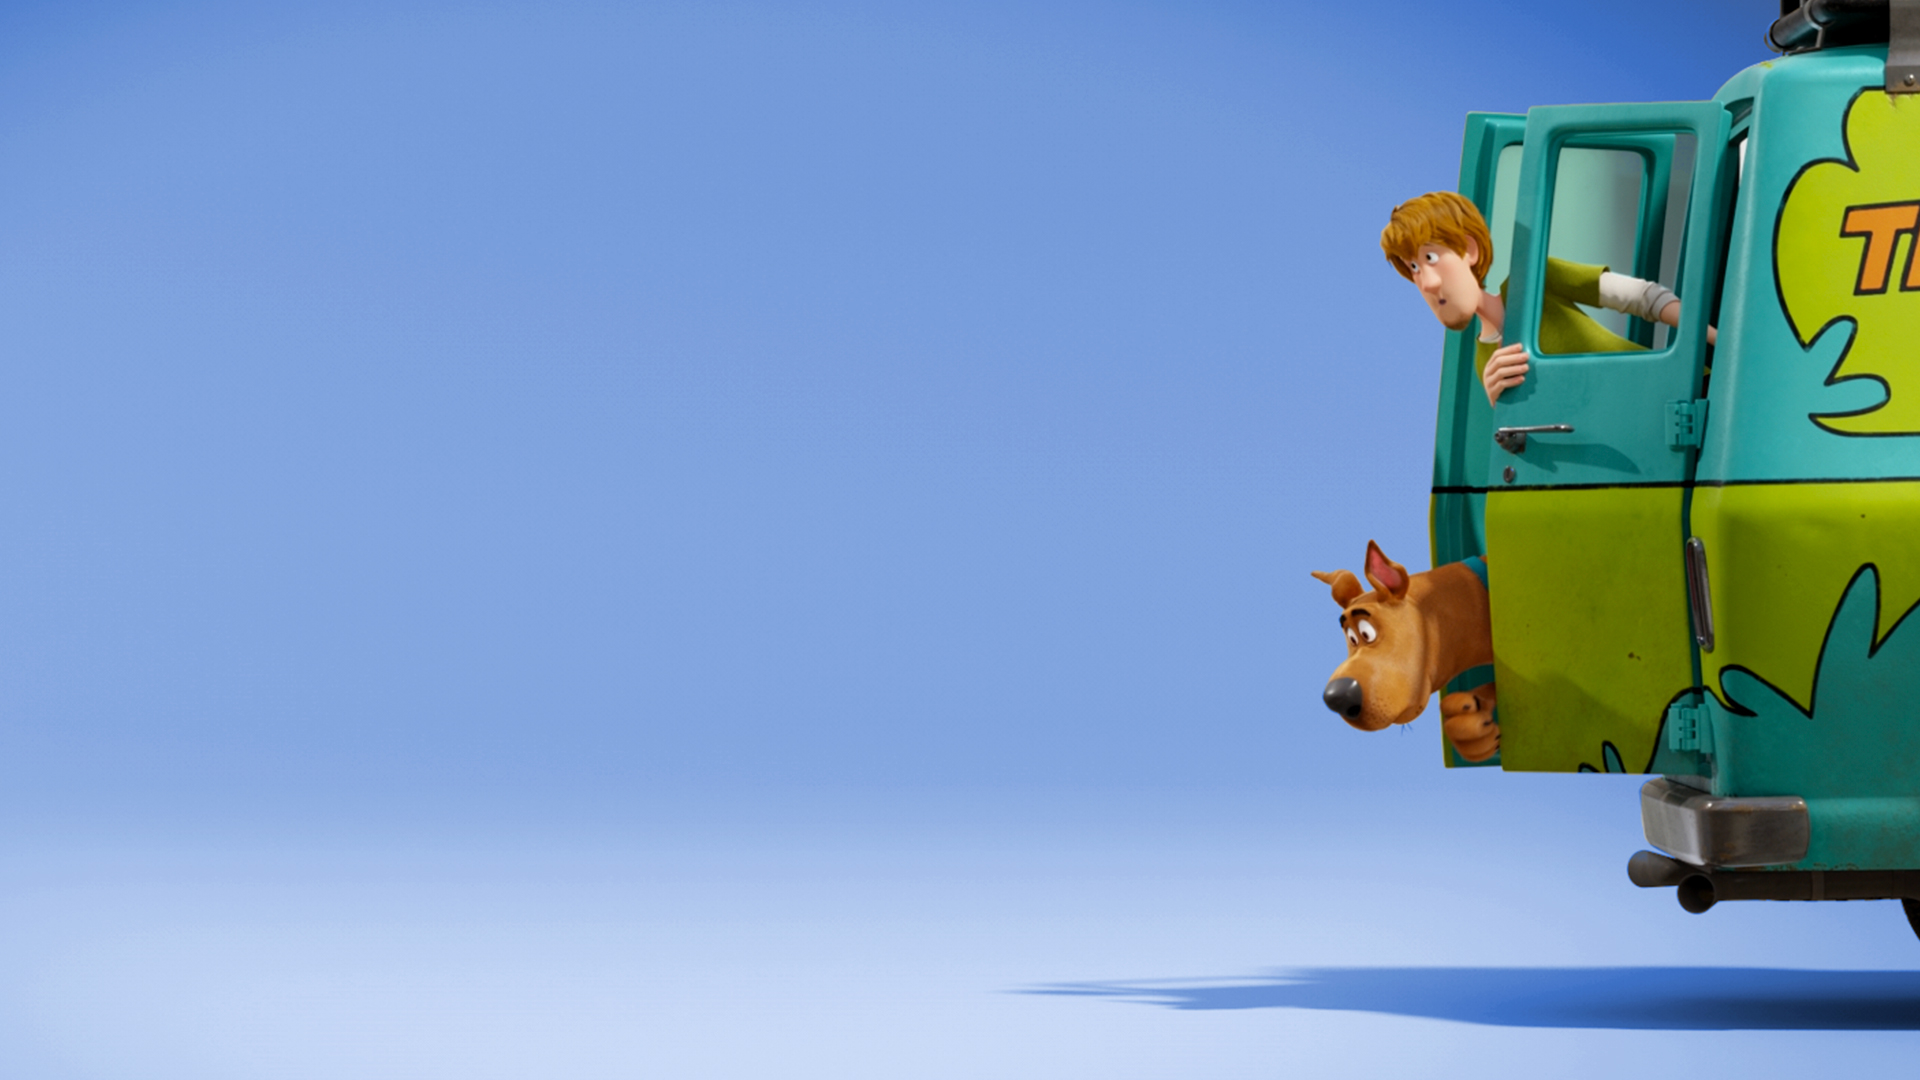 40 ScoobyDoo HD Wallpapers and Backgrounds